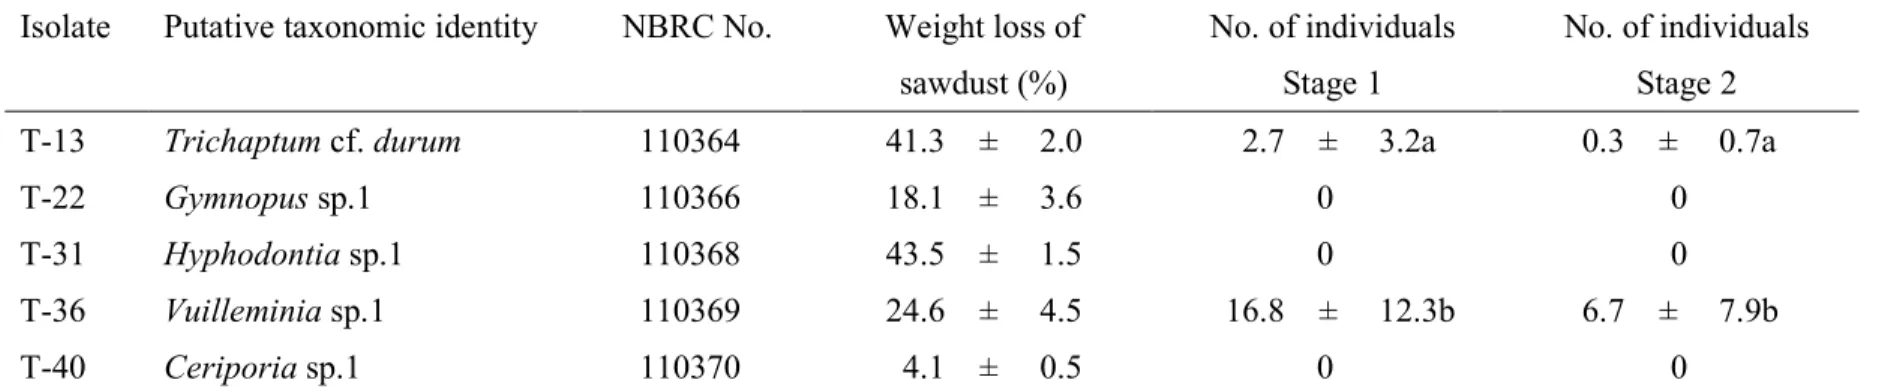 Table 4  Results of co-culture of E. altissima seeds with fungal isolates. Information about fungal isolates used for culture, percentage  weight loss of sawdust exposed for each fungal isolate, and the number of individuals germinated by the co-culture ar